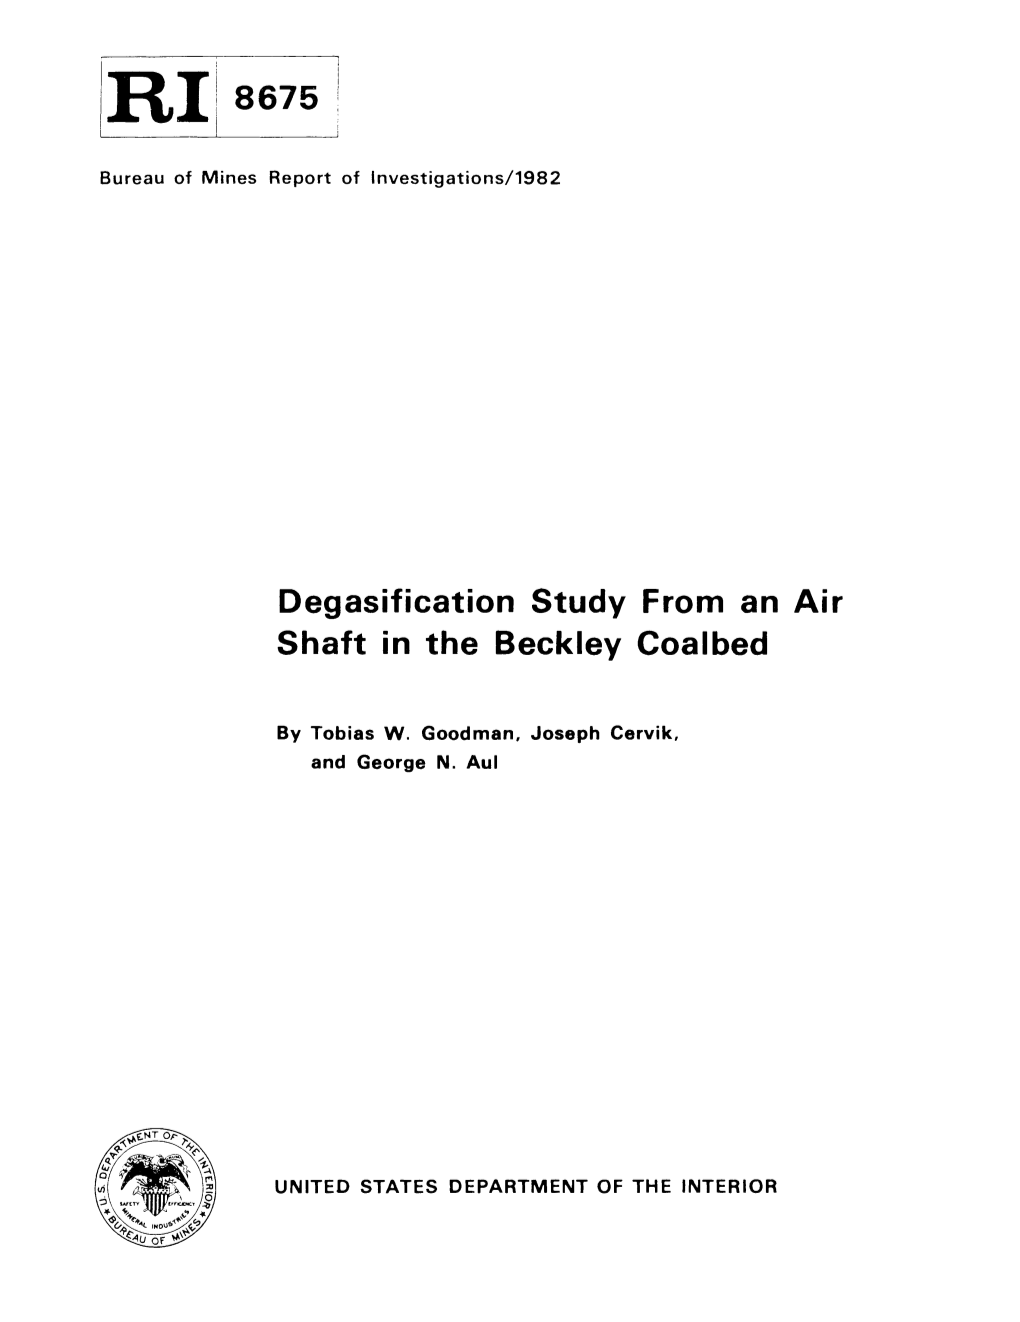 Degasification Study from an Air Shaft in the Beckley Coalbed